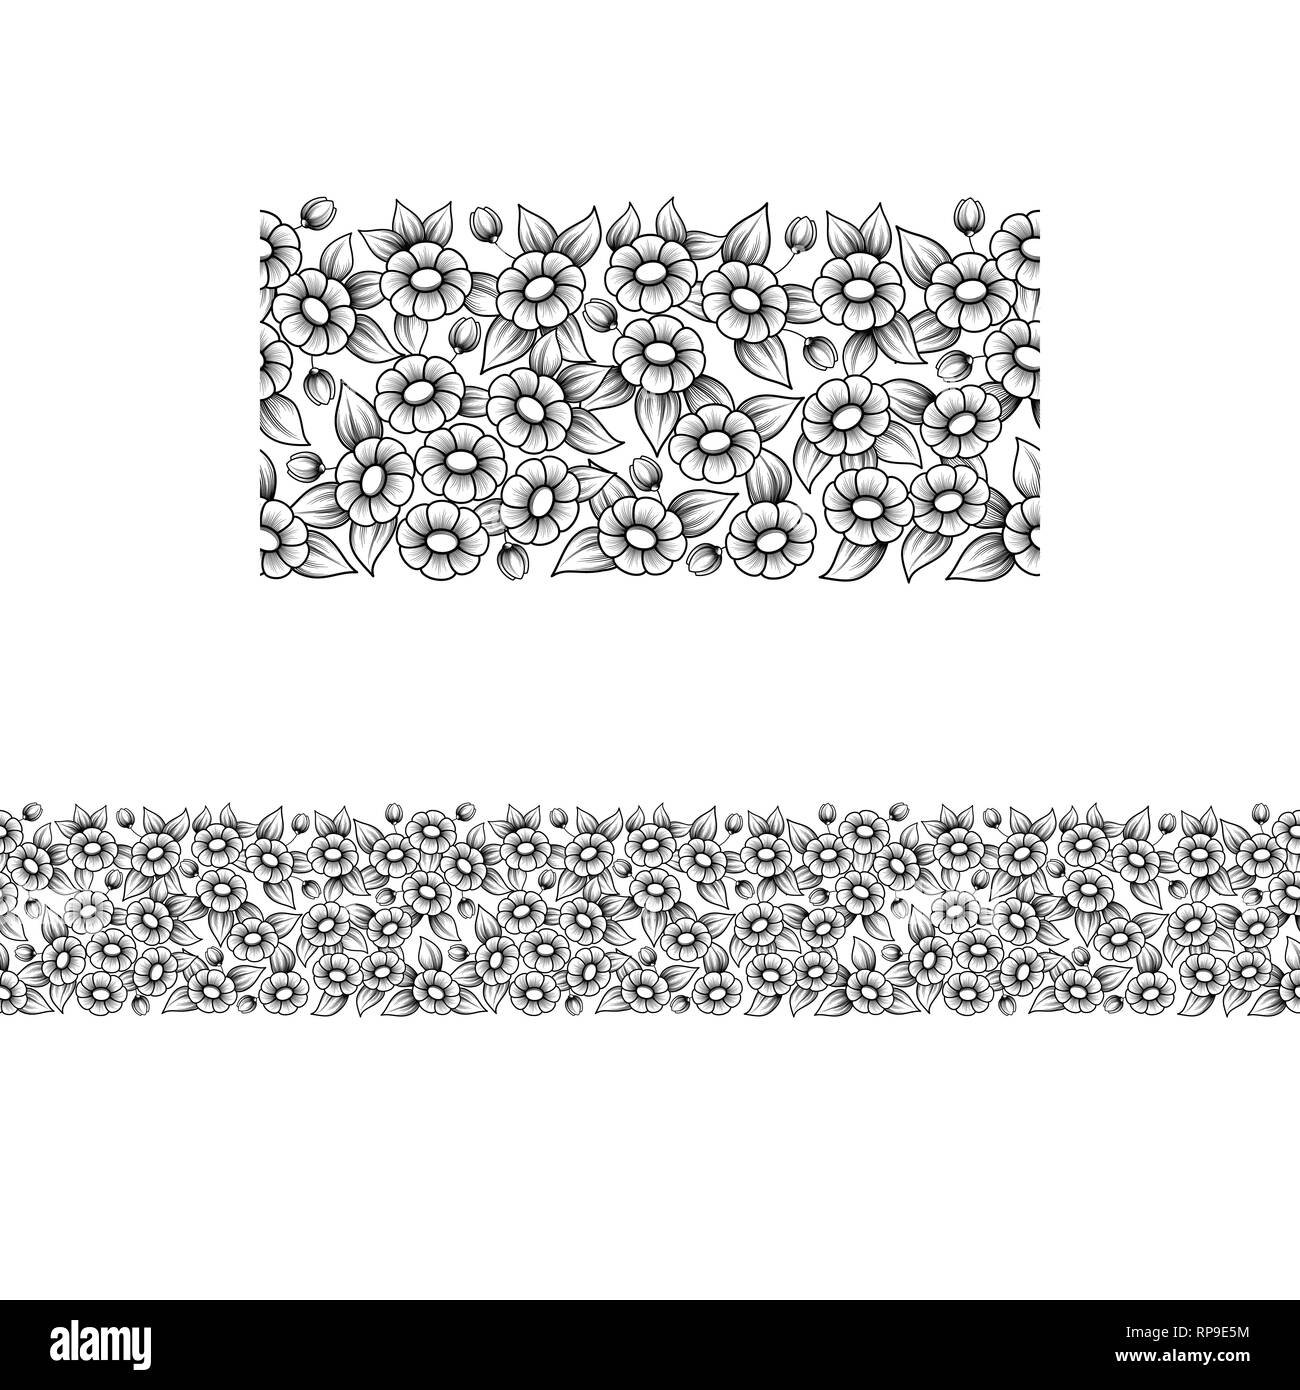 Black outline floral seamless pattern with daisy flowers isolated on white background Stock Vector